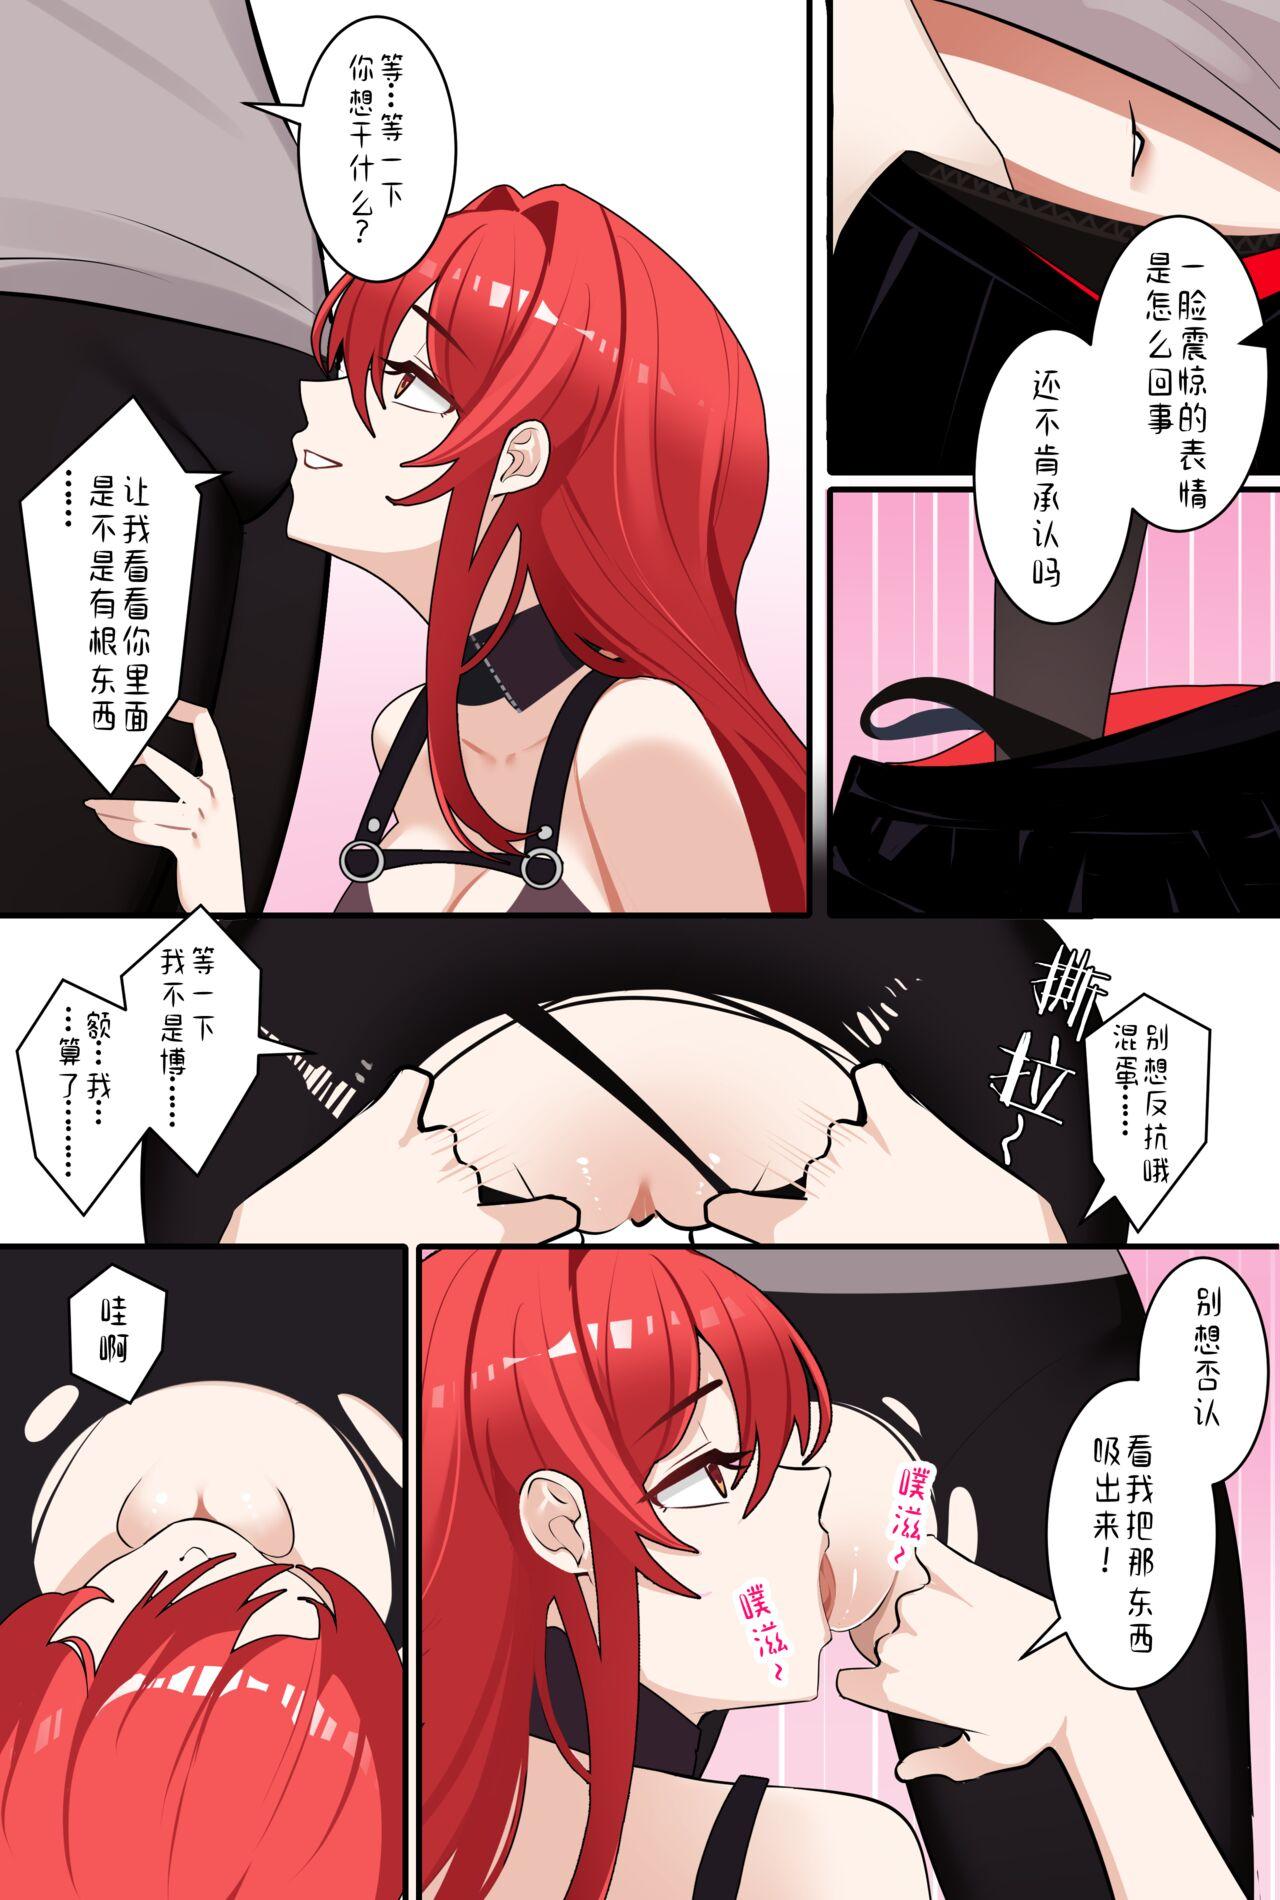 Nice Tits 明日方舟W - Arknights Chastity - Page 11